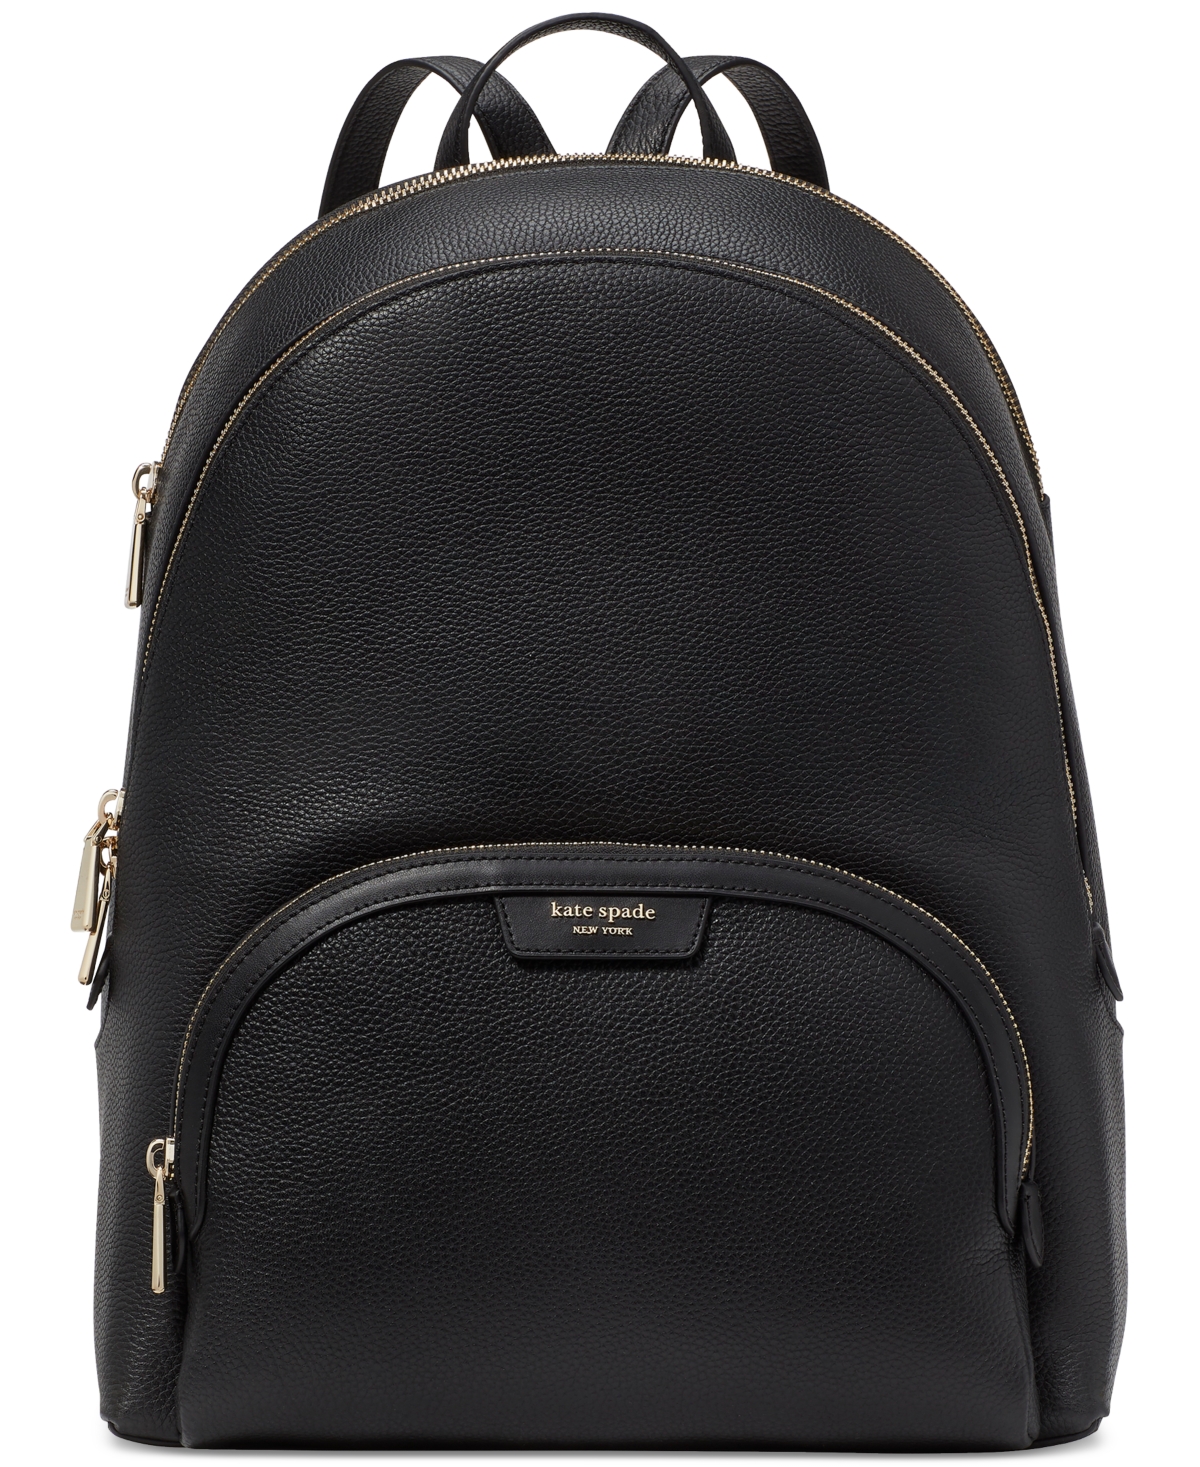 Hudson Pebbled Leather Large Backpack - Bungalow